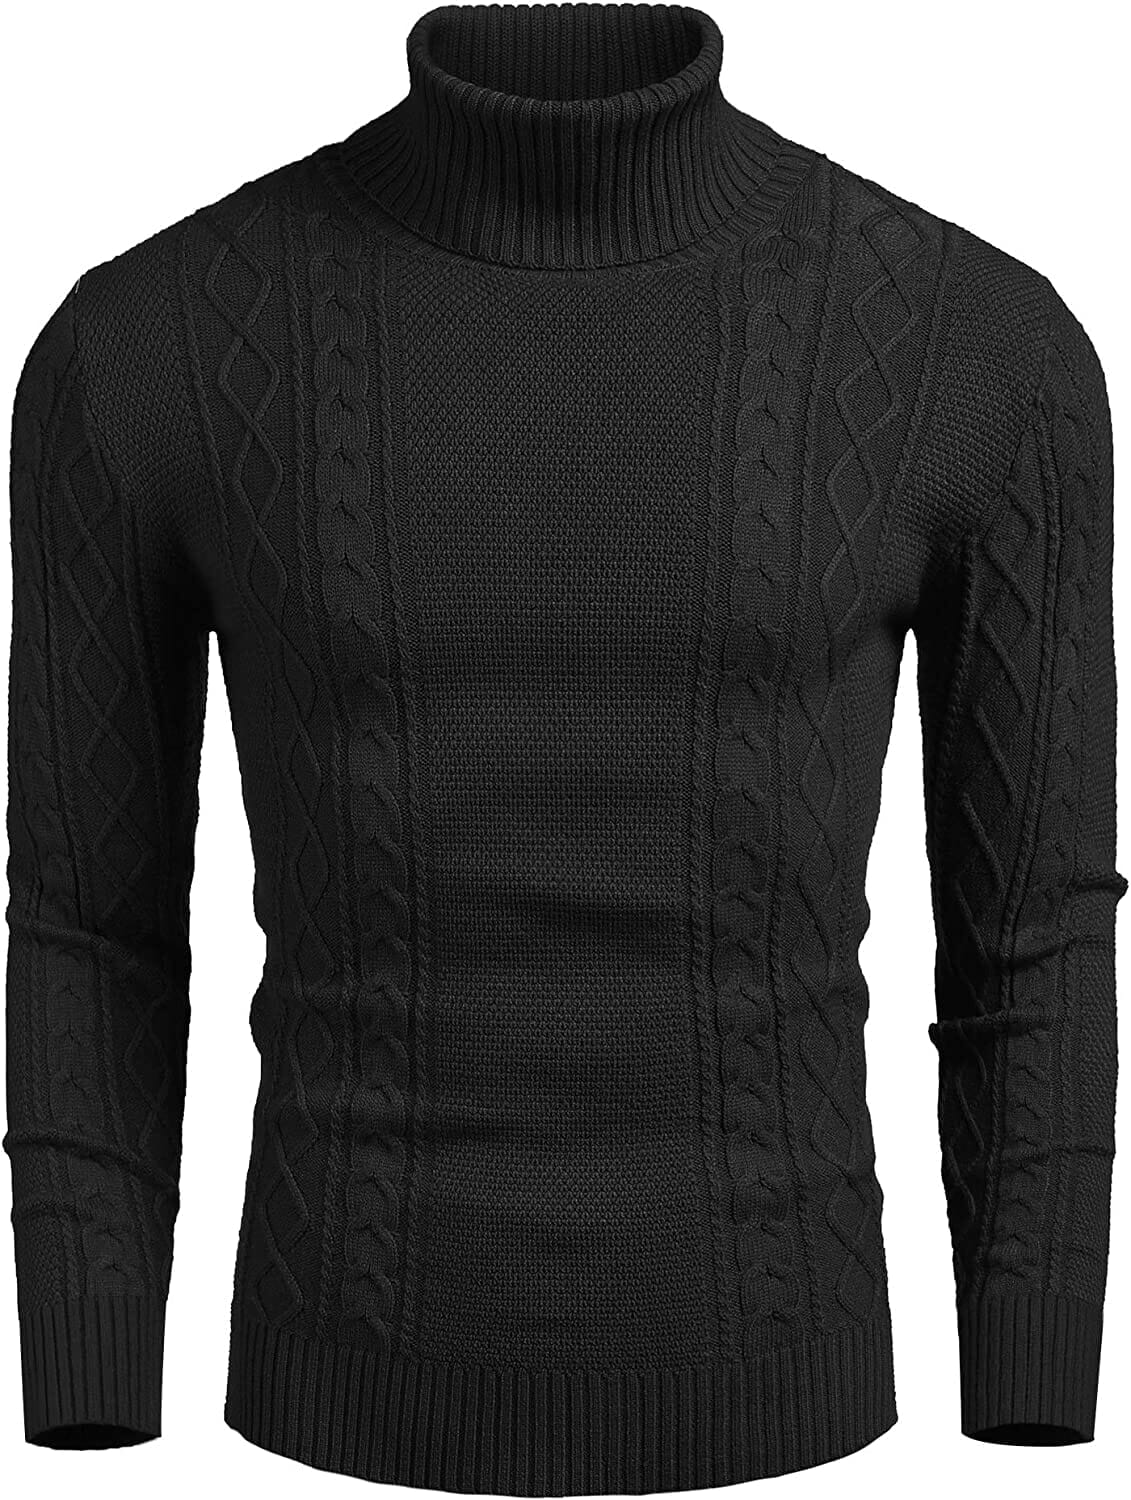 Turtleneck Casual Cable Knitted Pullover Sweaters (US Only) Fashion Hoodies & Sweatshirts COOFANDY Store Black S 